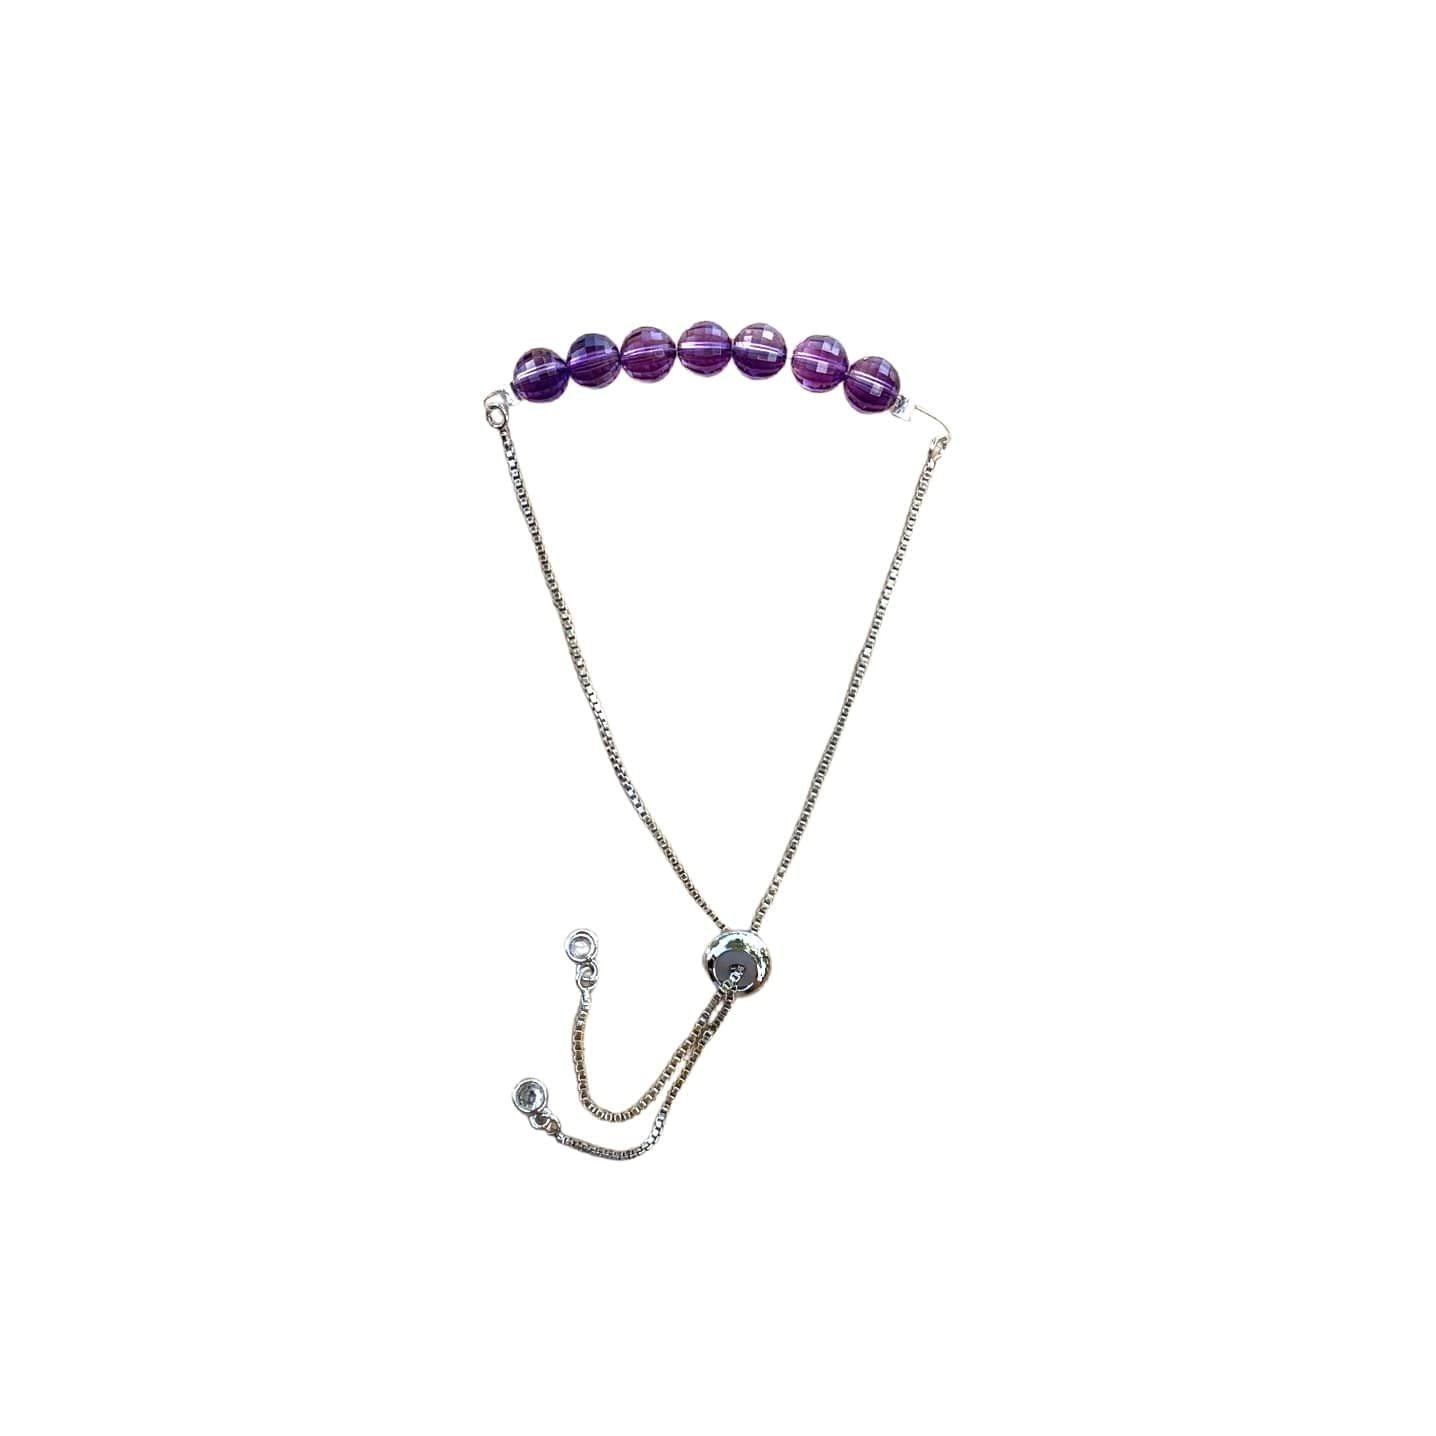 healing crystal bracelets dainty 6mm amethyst with adjustable chain